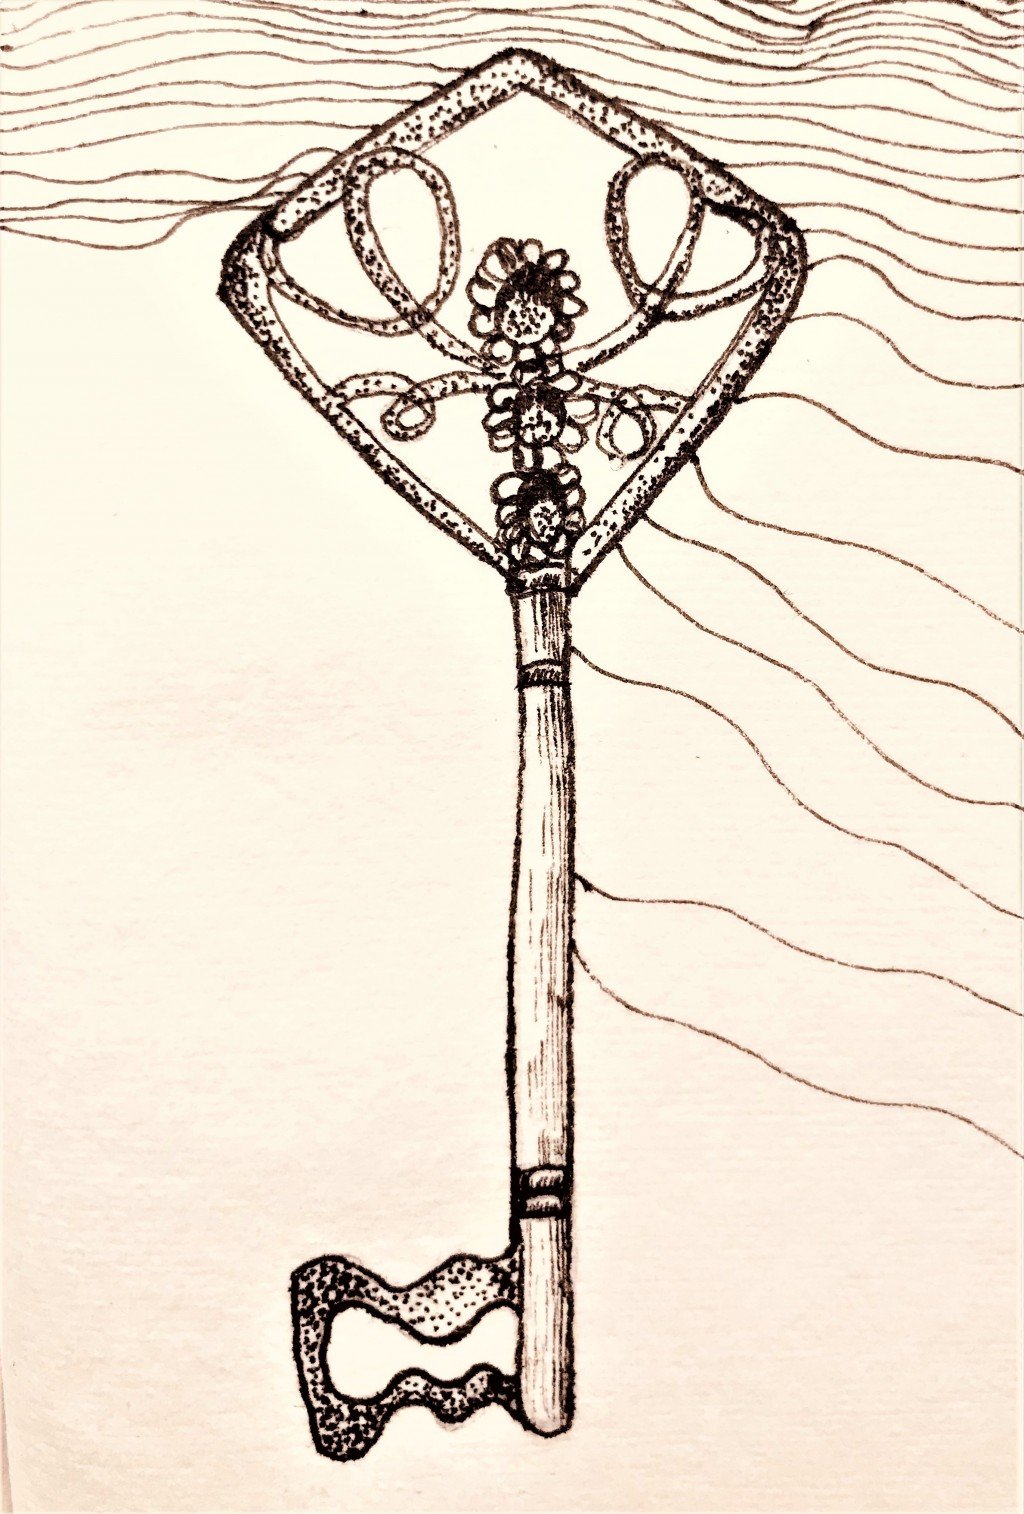 Skeleton Key drawing by Suzette Doodle Addicts